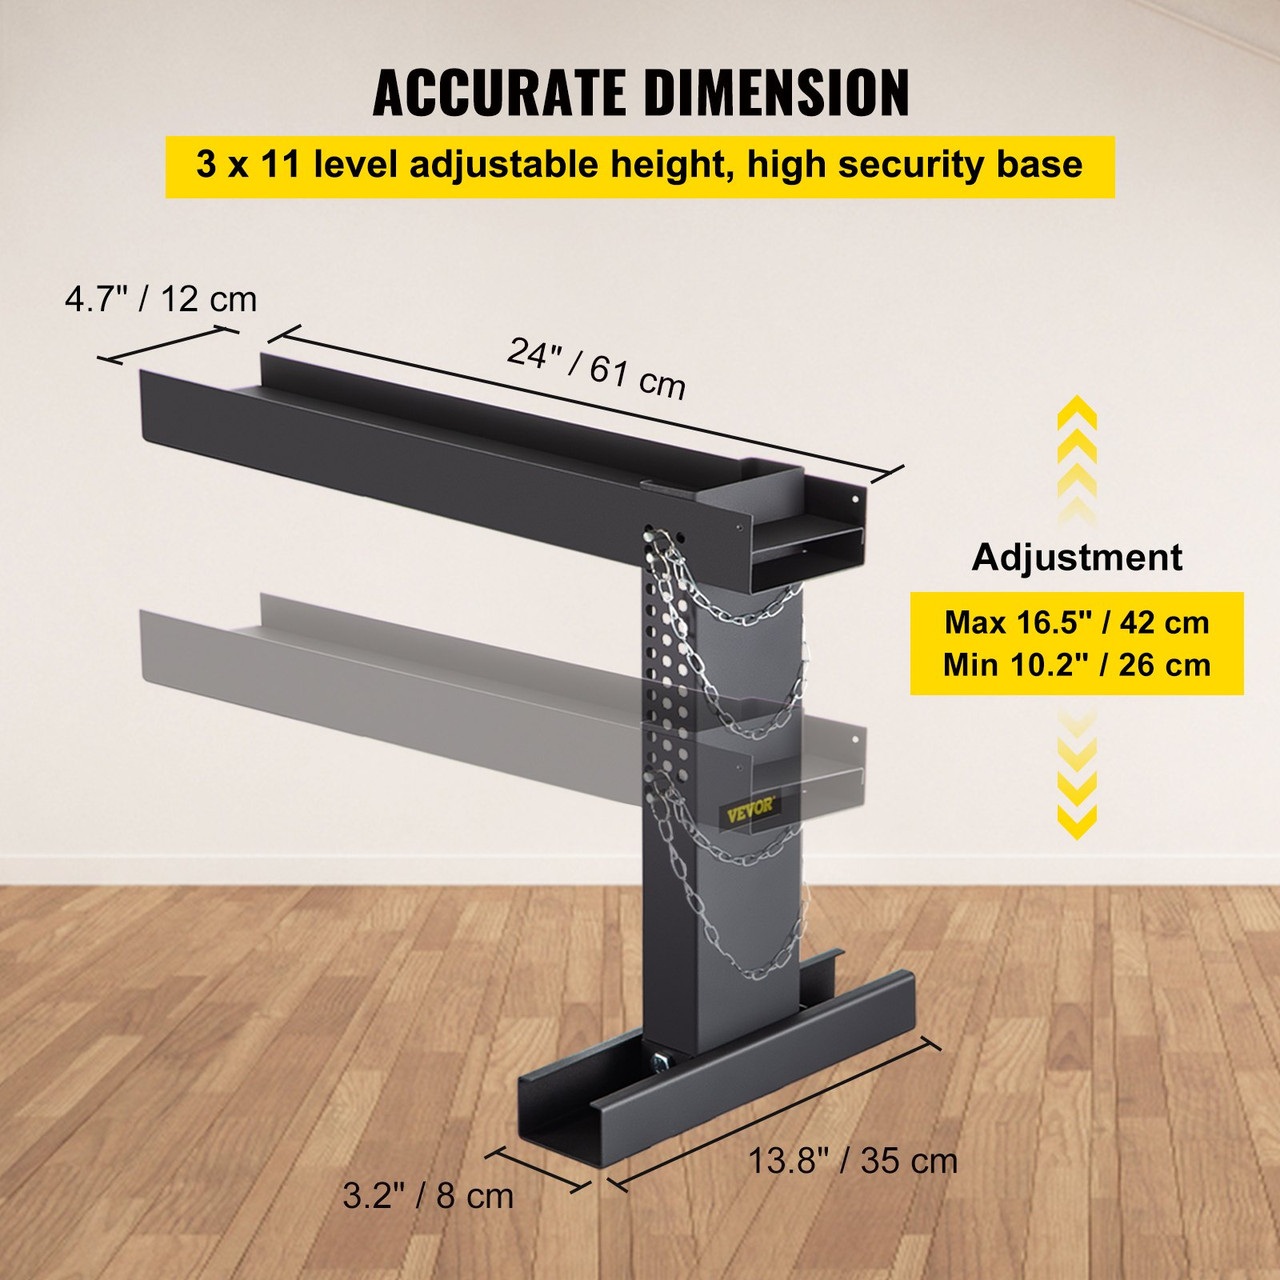 Ladder Extender 20x4.7-Inch, Extension Ladder 10.5-16.7-Inch Adjustable Height Range, Ladder Leveling Tool, Stair Ladder Extension with Chain Pins in Steel for Stairs, in Black Powder Coated